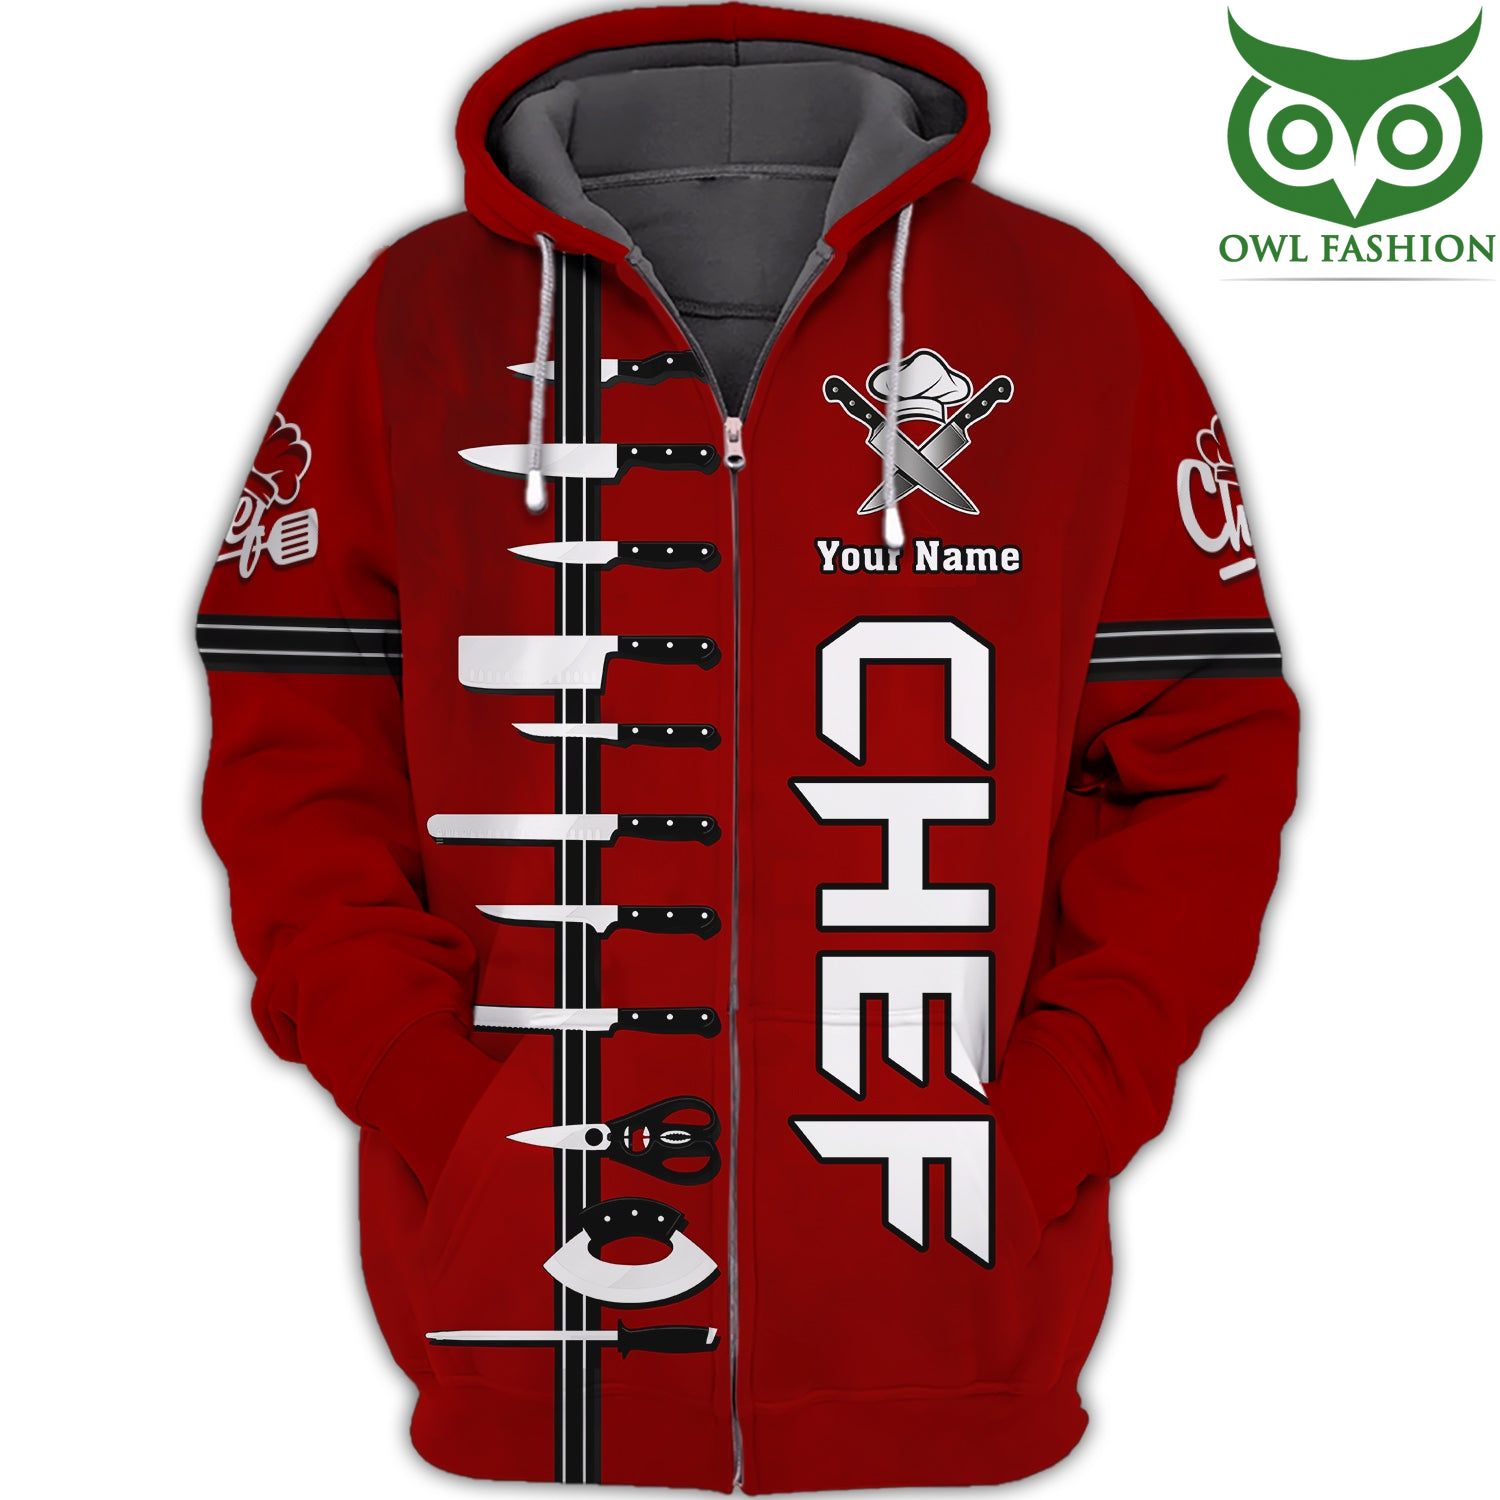 https://images.shopowlfashion.com/2022/02/EaJVsv3E-60-Chef-Cooking-Lovers-Personalized-Name-red-3D-Zipper-Hoodie-.jpg